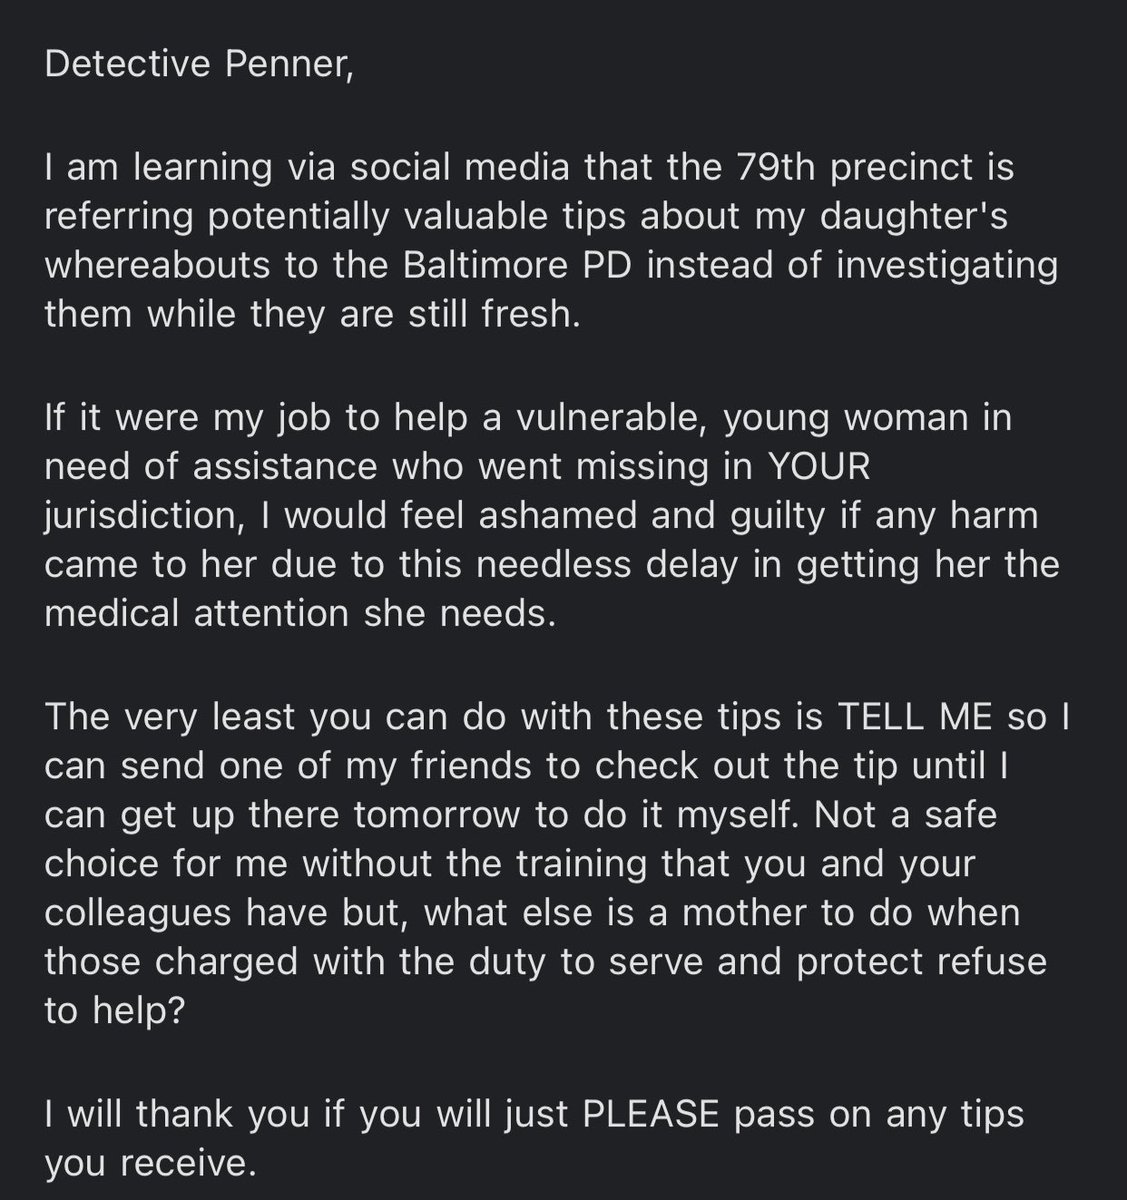 After hearing this yesterday, my girlfriend’s mom wrote an email to Det. Penner asking why this happened. We got a response from her this morning, directing us back to the Baltimore detective